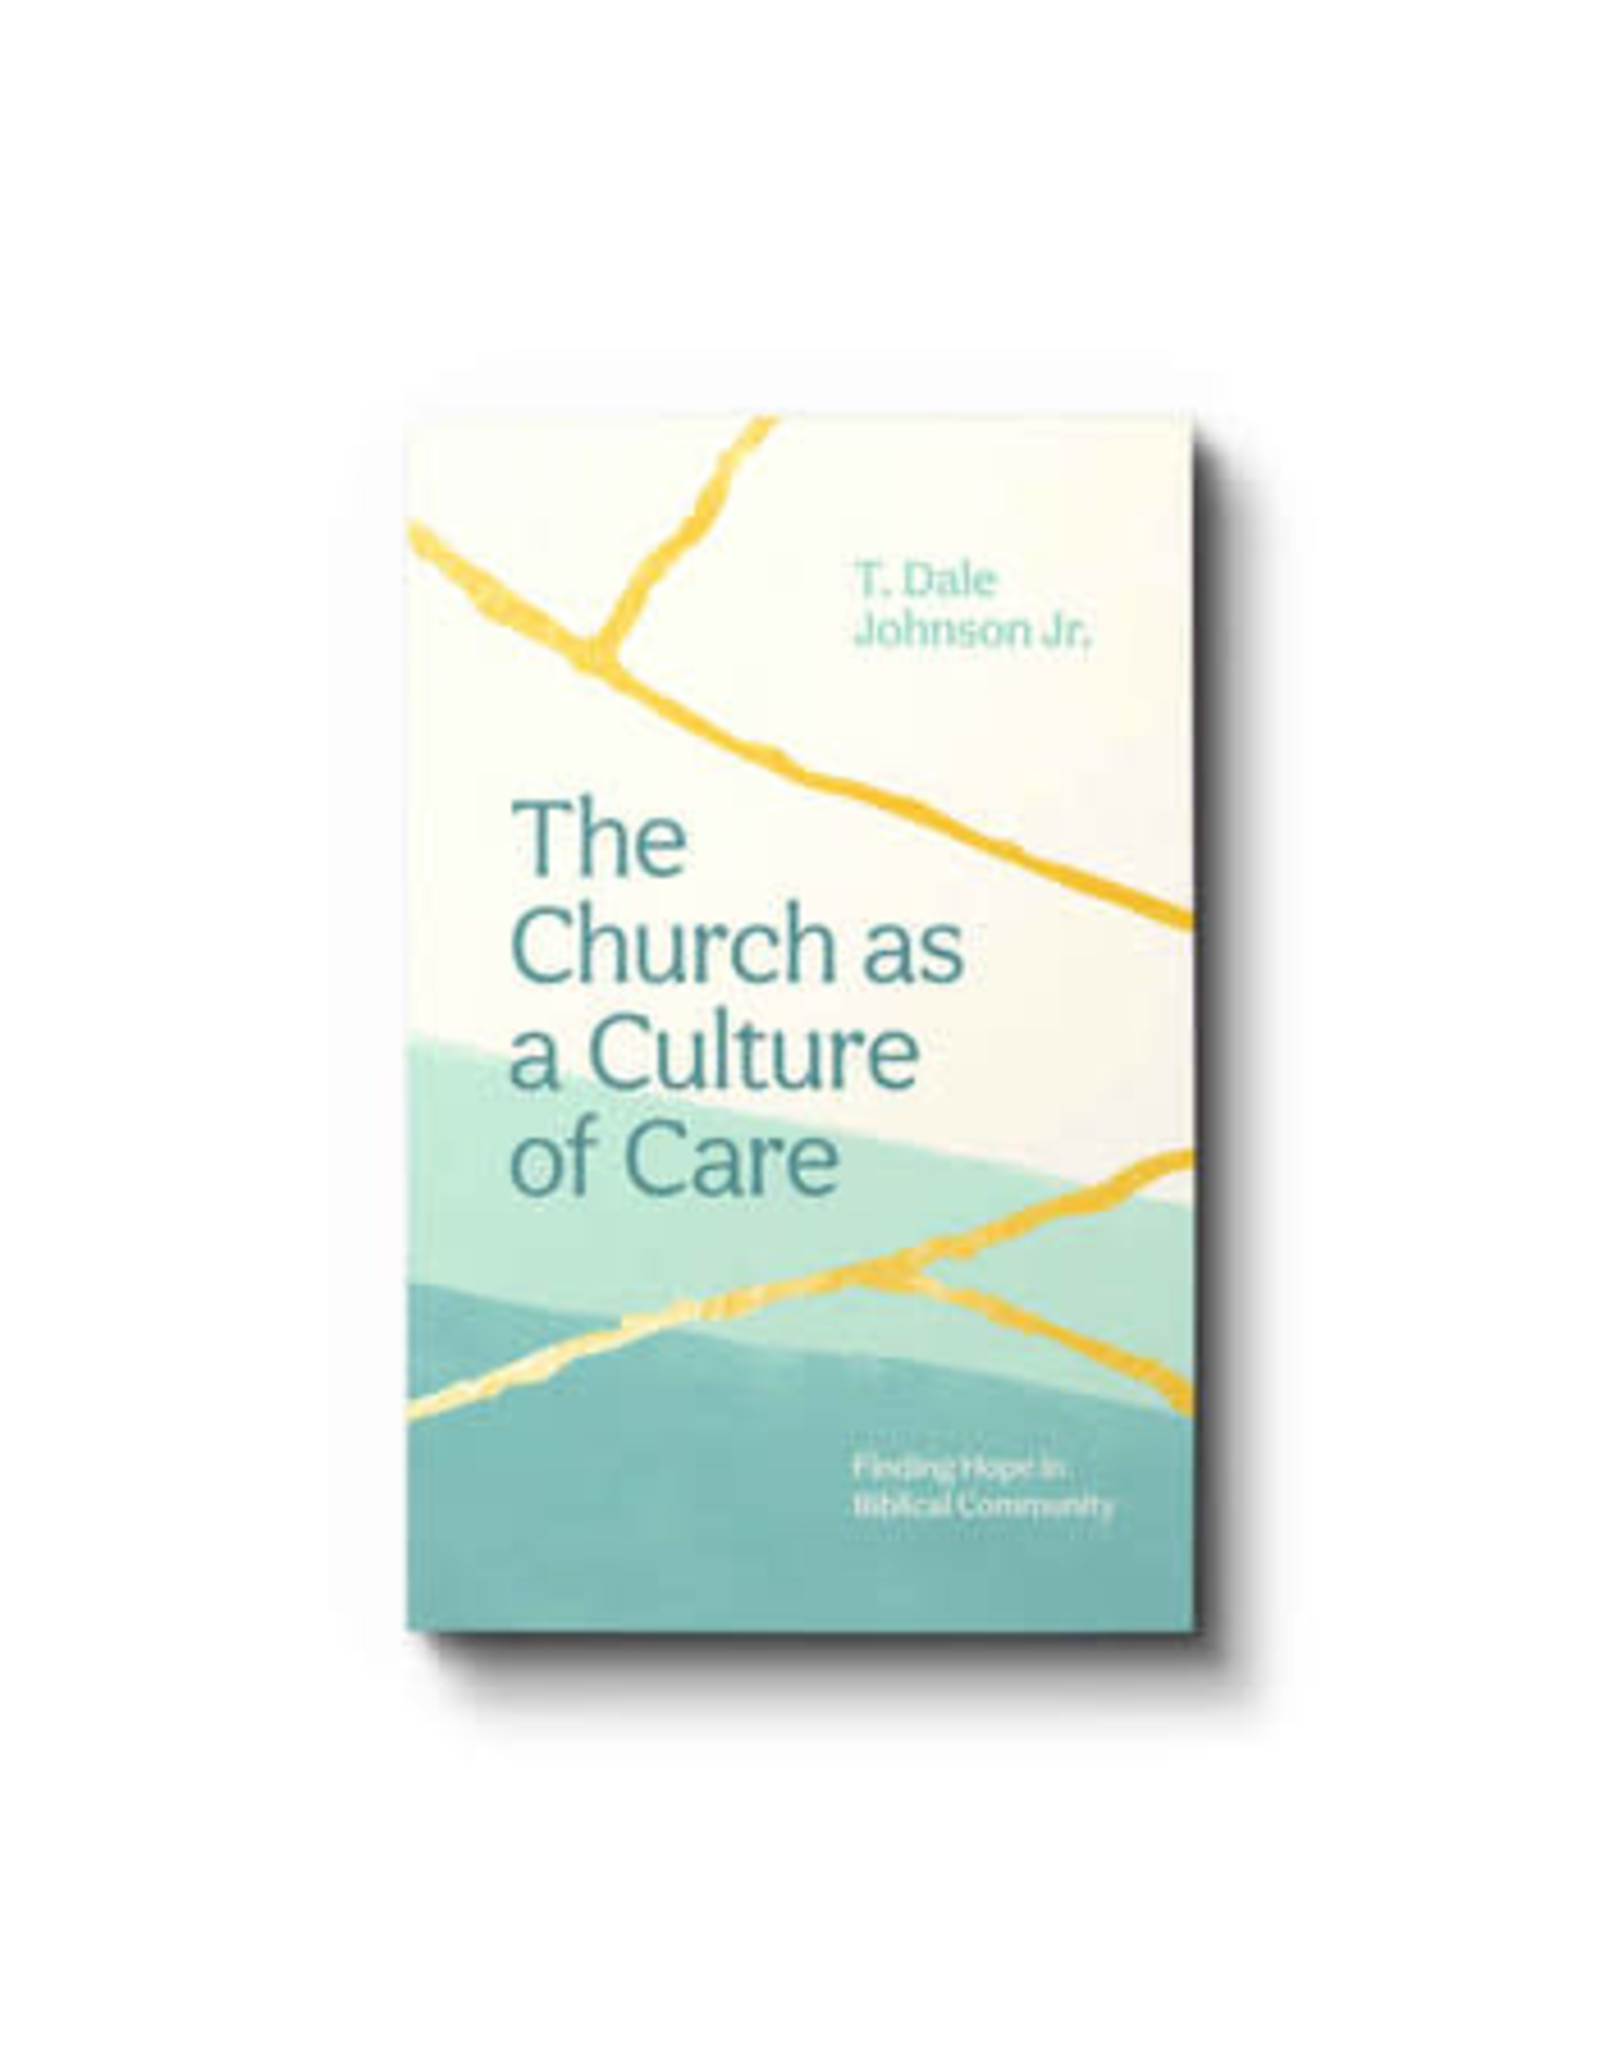 T Dale Johnson, Jr The Church as a Culture of Care: Finding Hope in Biblical Community